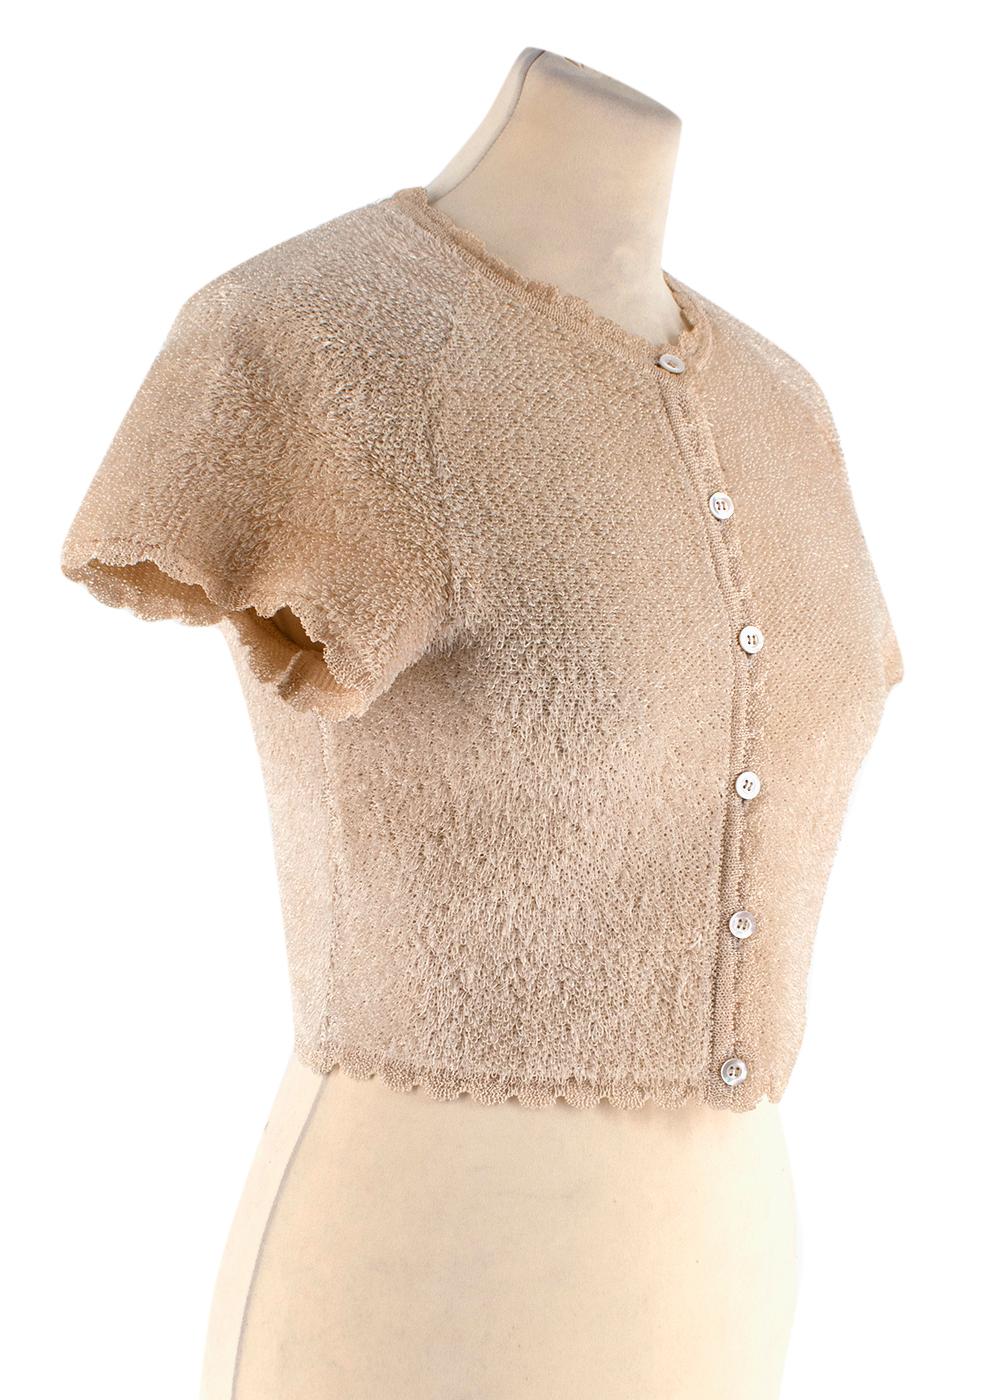 Alaia Beige Short Sleeve Textured Cardigan 
- Short sleeve
- Scalloped edge detail
- Pearlescent buttons
- Round neck
- Textured loop knit

Synthetic Material

Chest 40cm
Length 40cm
